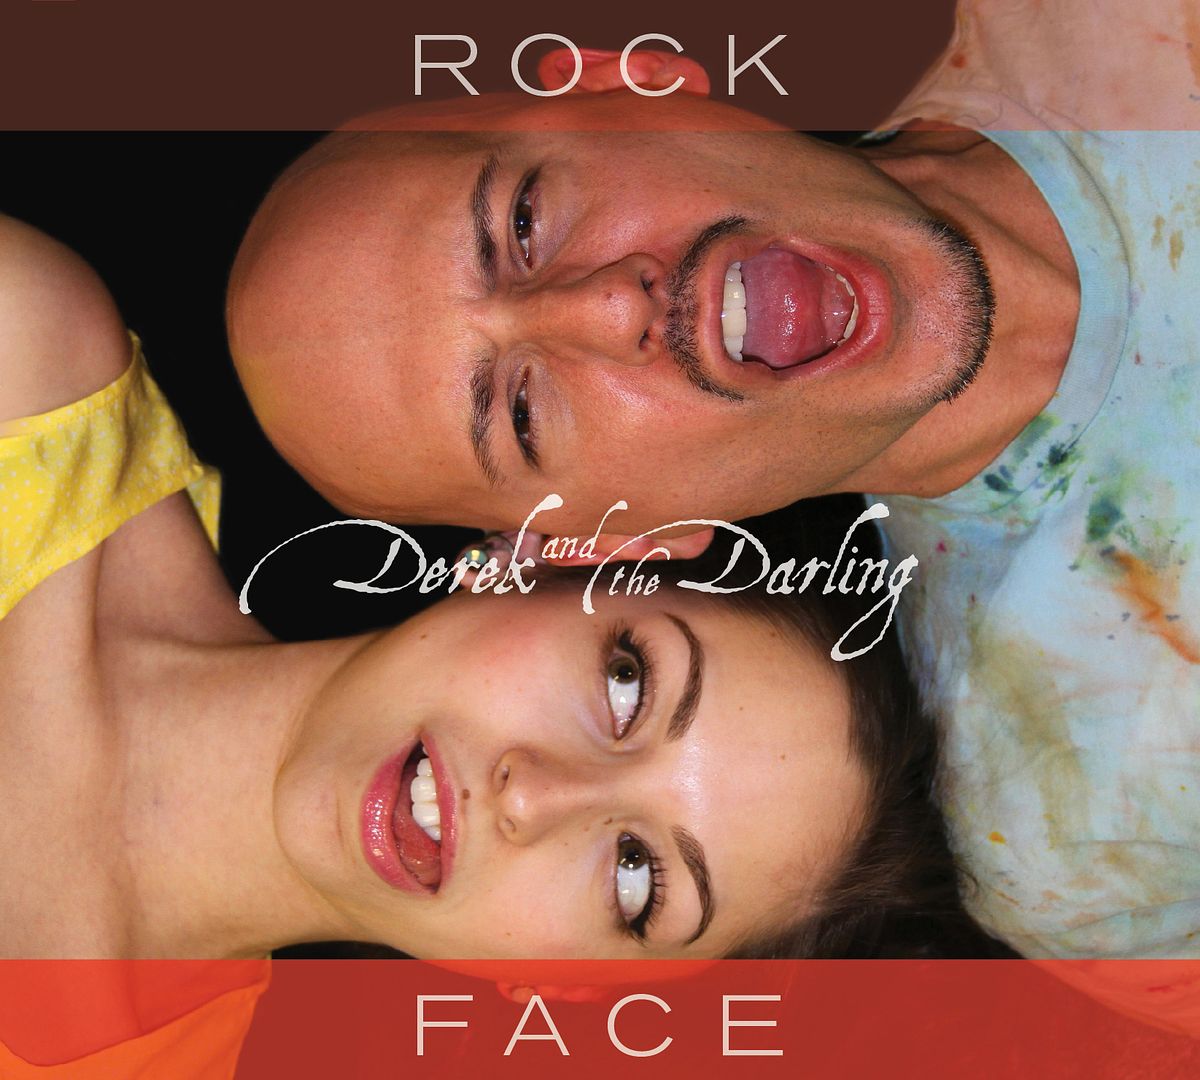 derek and the darling,rock face,cover